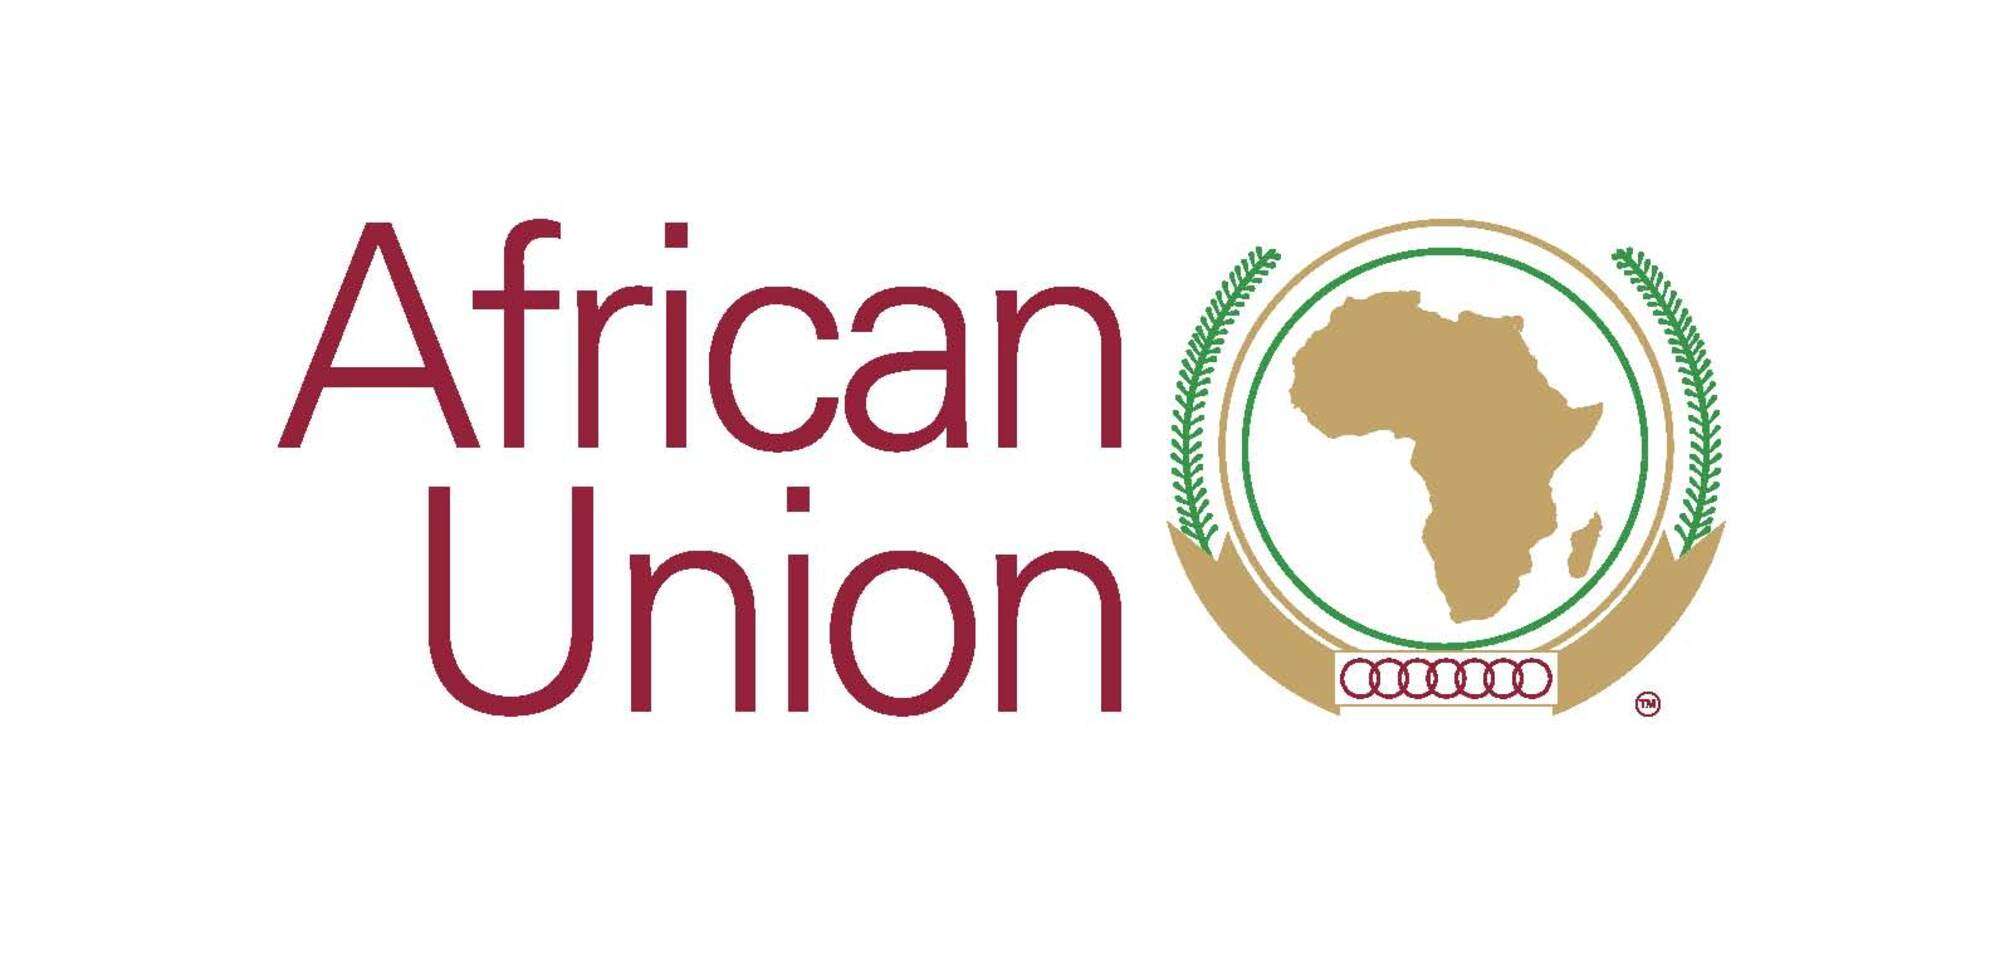 A Brief Overview of the African Union